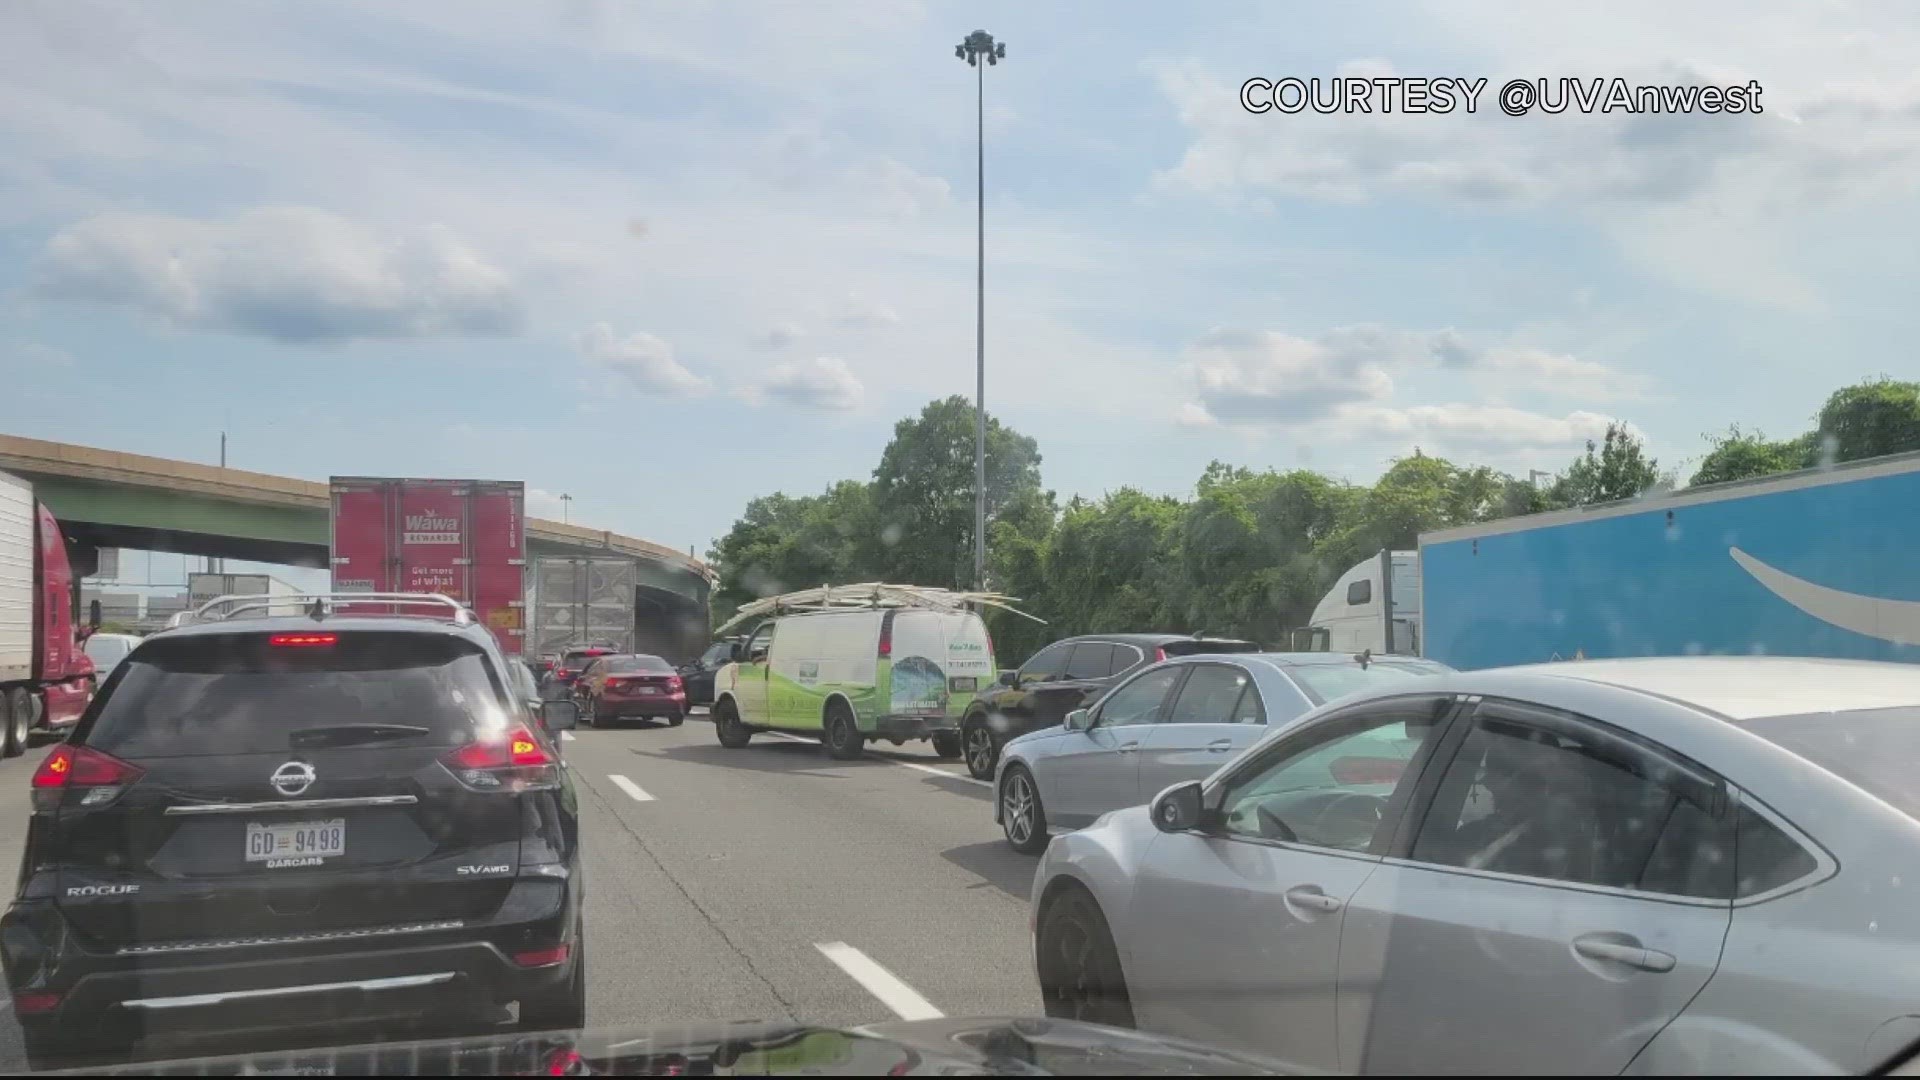 All lanes of I-95 at Fairfax County Parkway near Newington have reopened, according to VDOT officials.